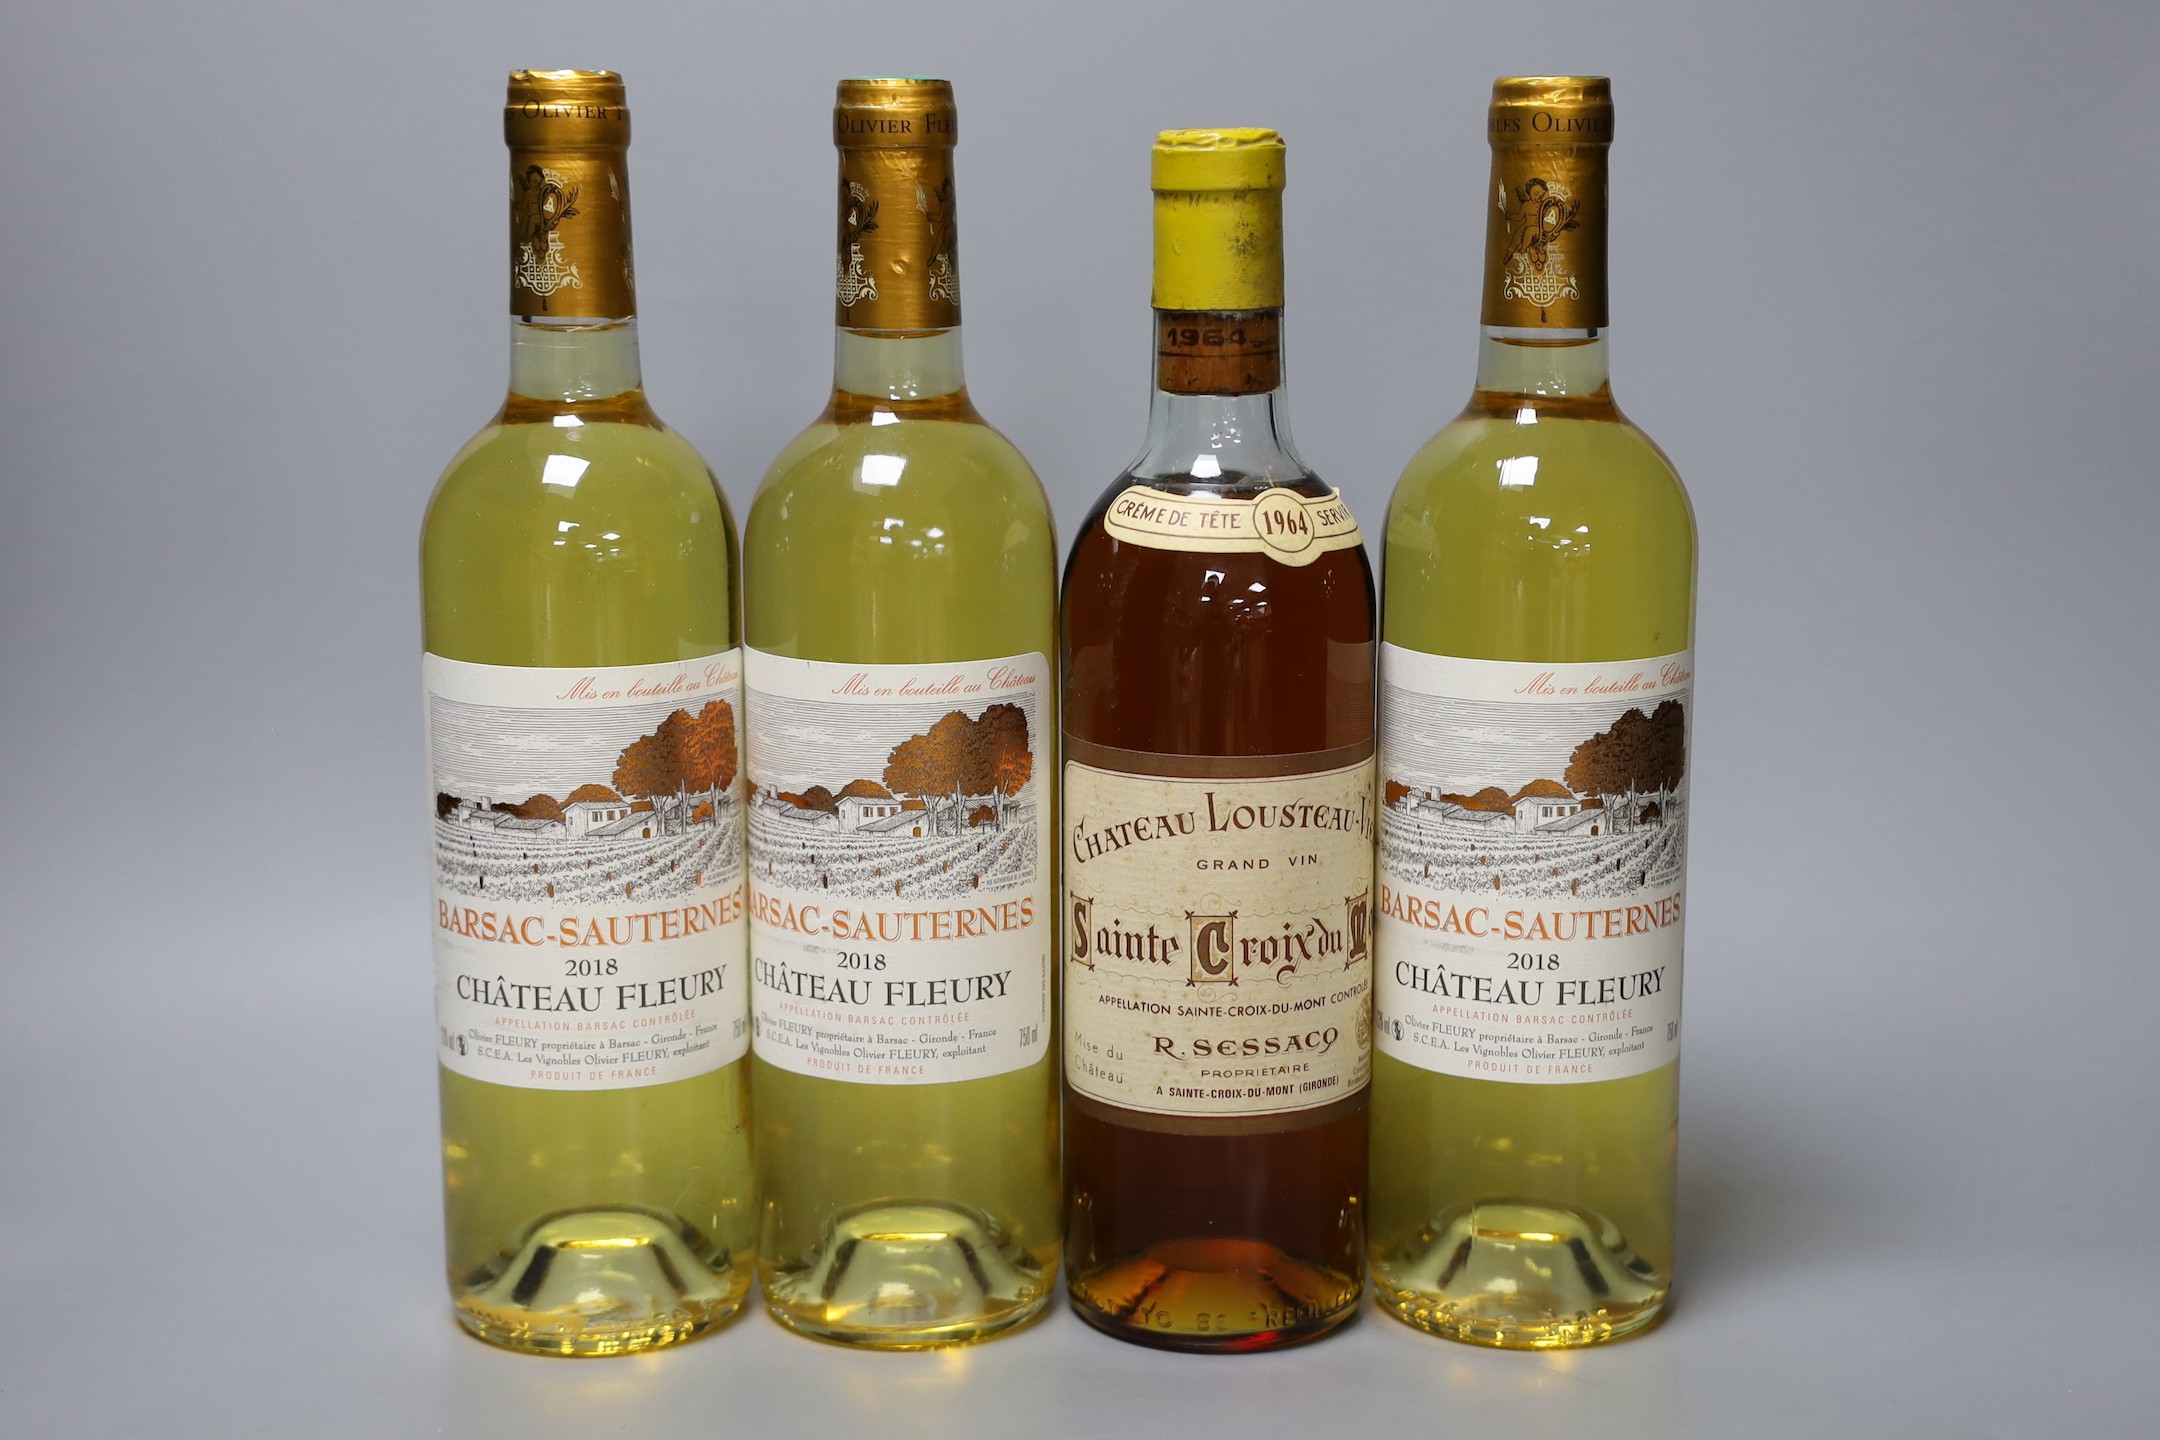 A bottle of Chateau Lousteau-Vieil 1964 and three bottles of Chateau Fleury 2018